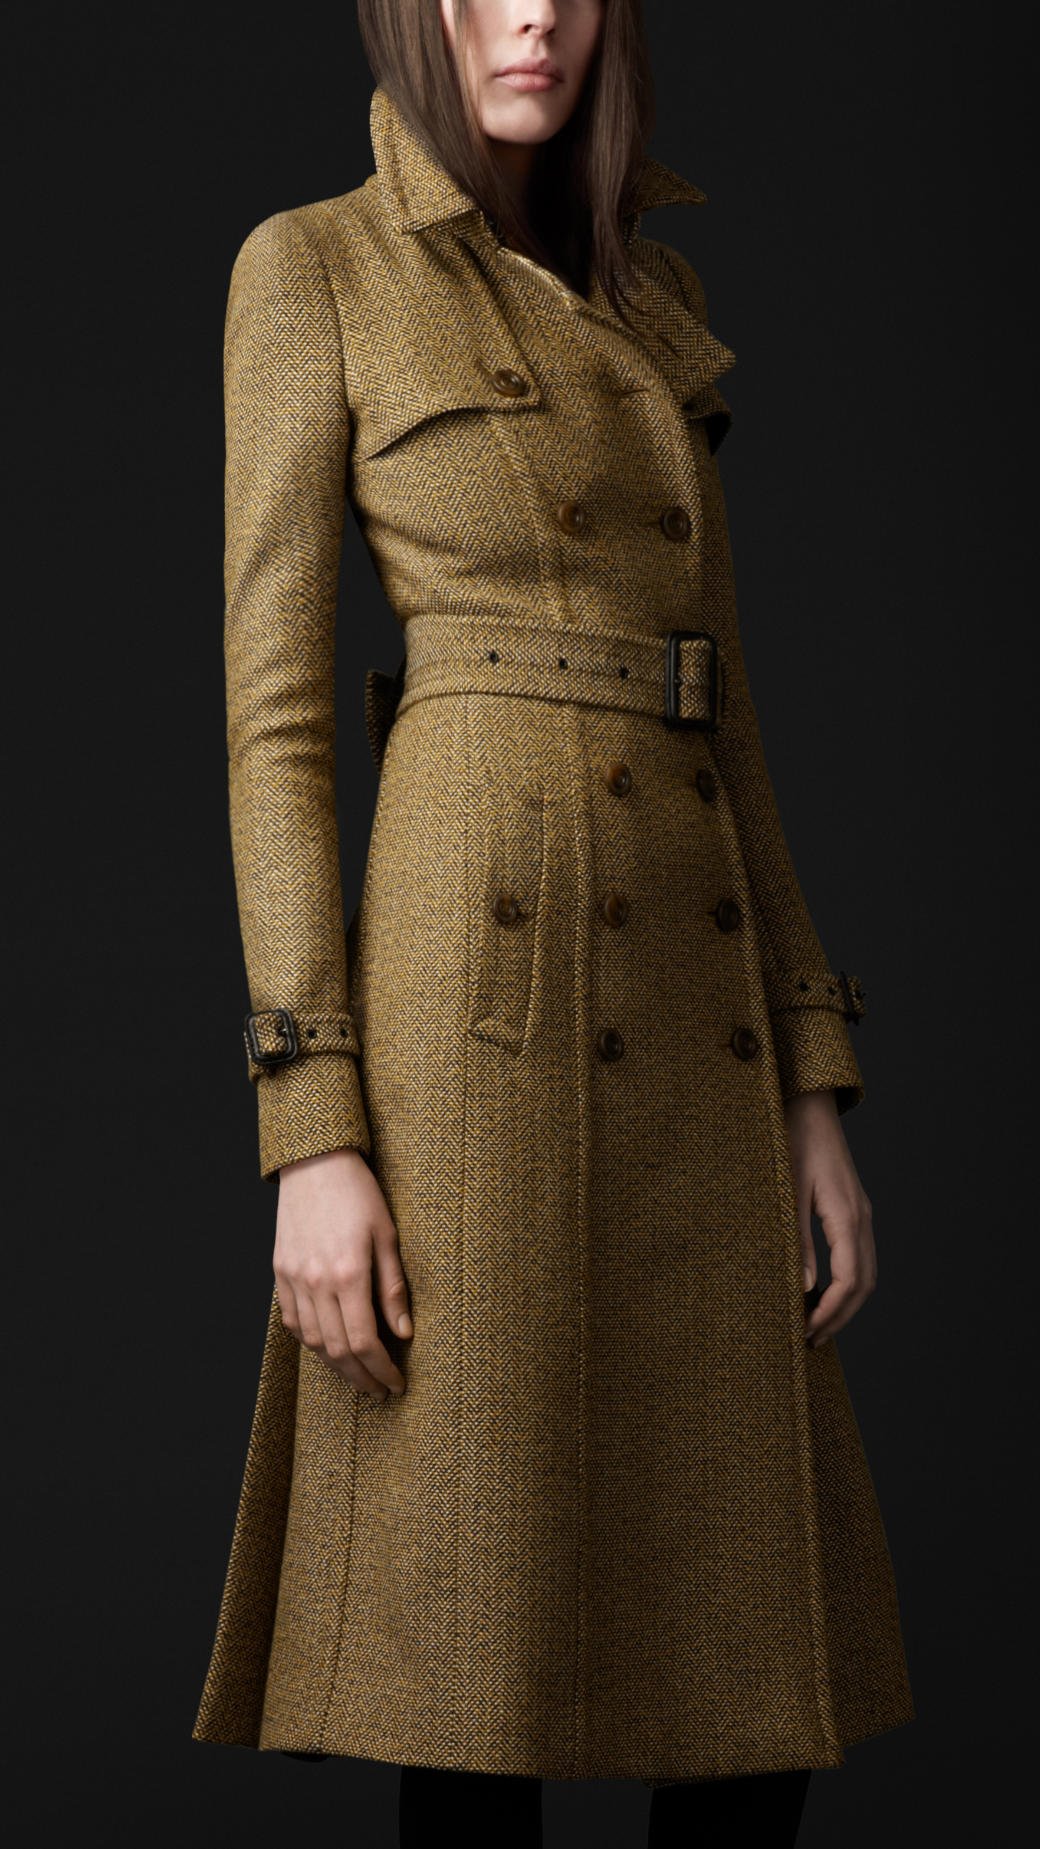 Lyst - Burberry Prorsum Tailored Wool Trench Coat in Natural